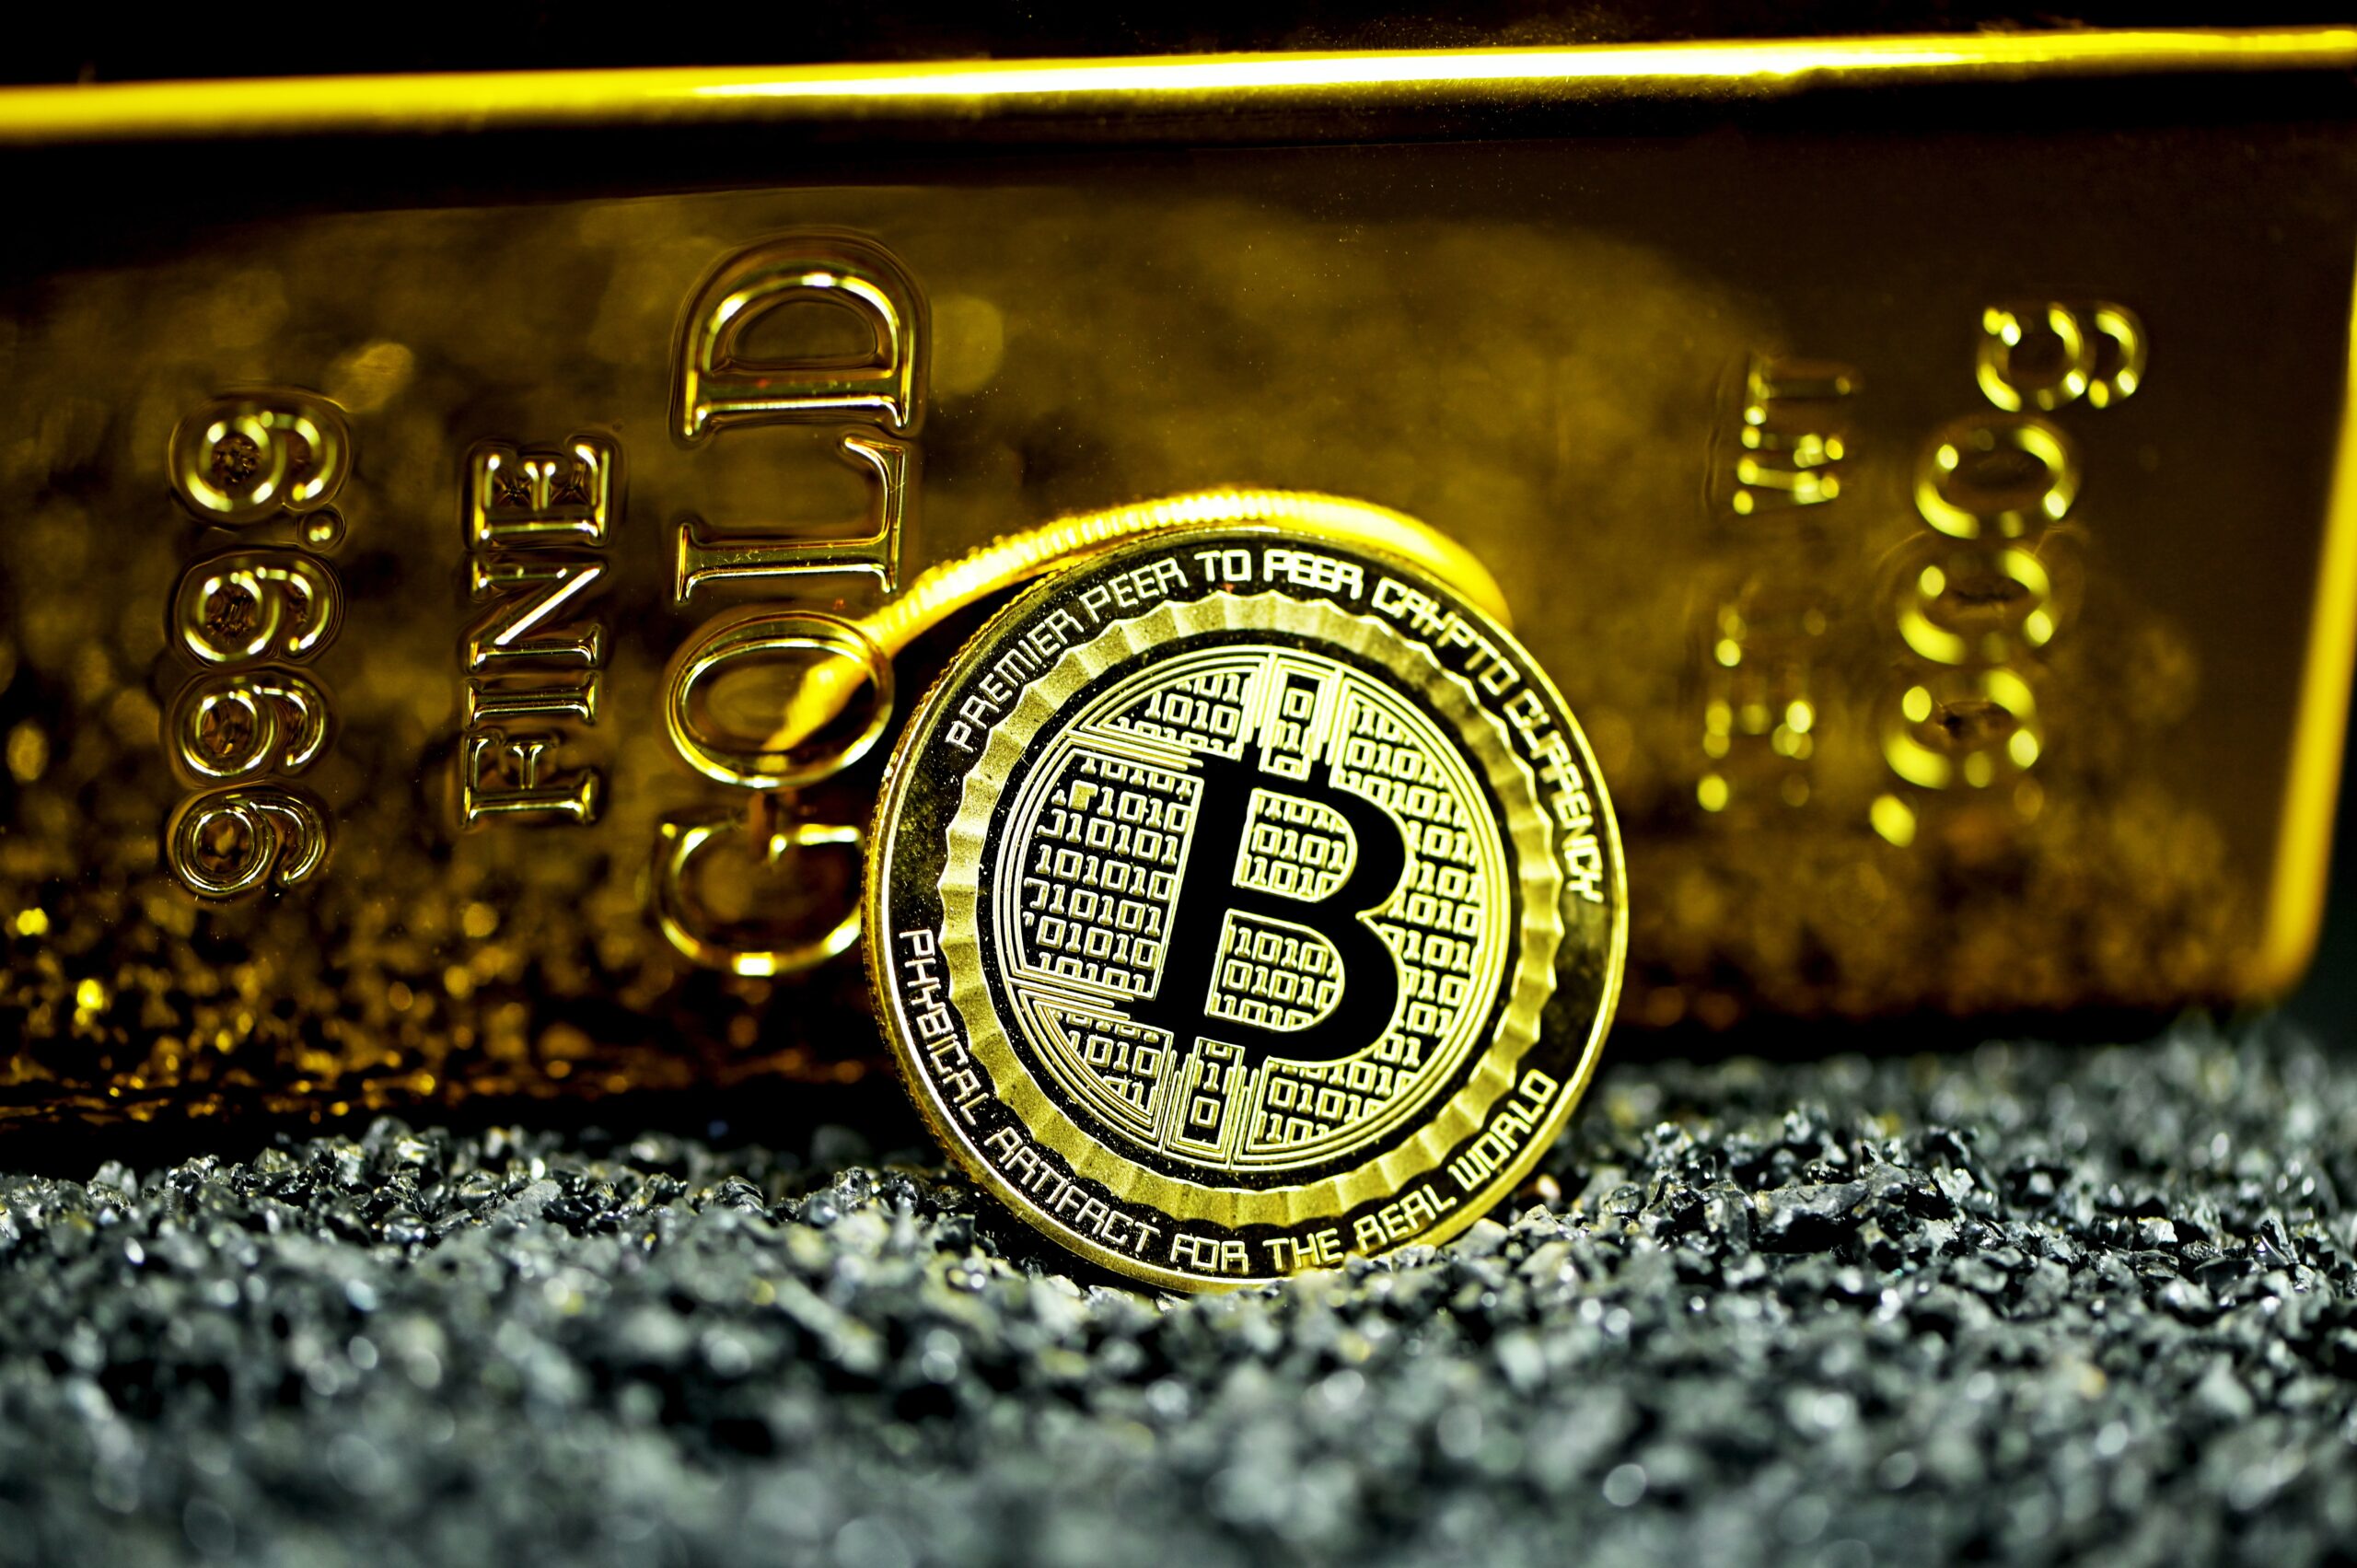 Why Bitcoin is called “Digital Gold” & “The People’s Money”